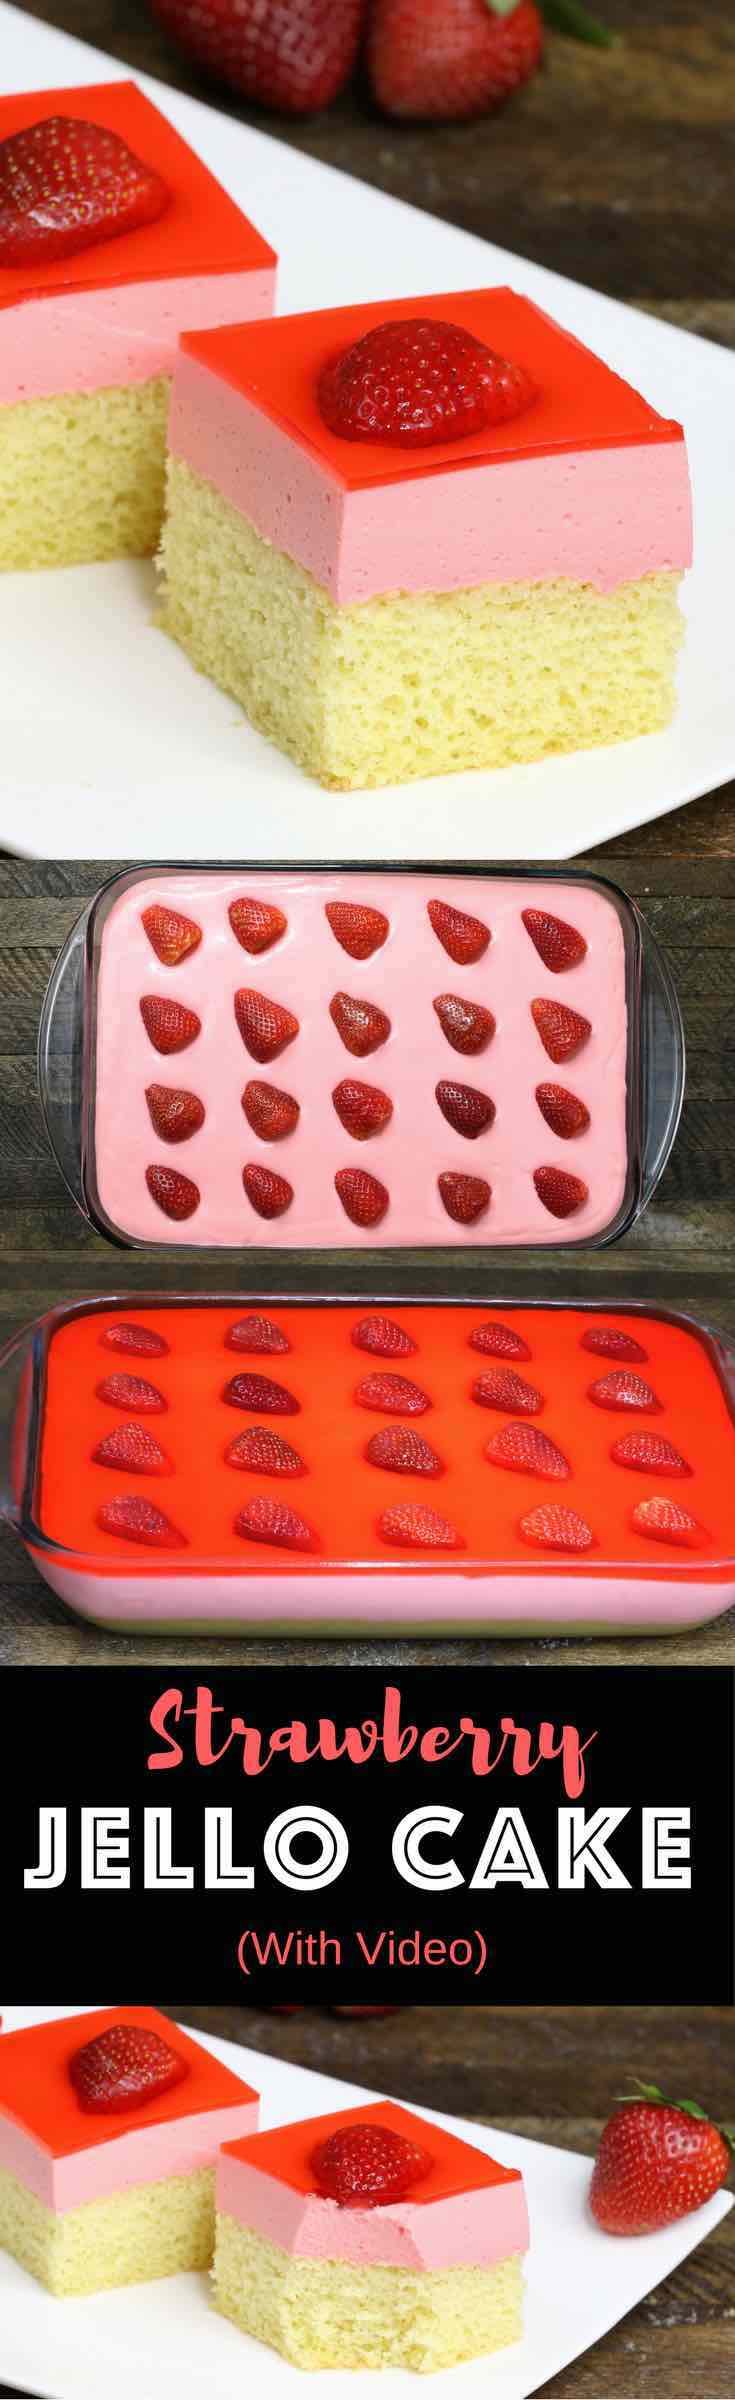 Strawberry jello cake is a delicious dessert. All you need is a few simple ingredients: yellow cake, strawberry jello, whipped topping and strawberries. An easy recipe that makes an incredible dessert for parties, birthday parties, Mother’s Day and Easter. Video recipe. | Tipbuzz.com